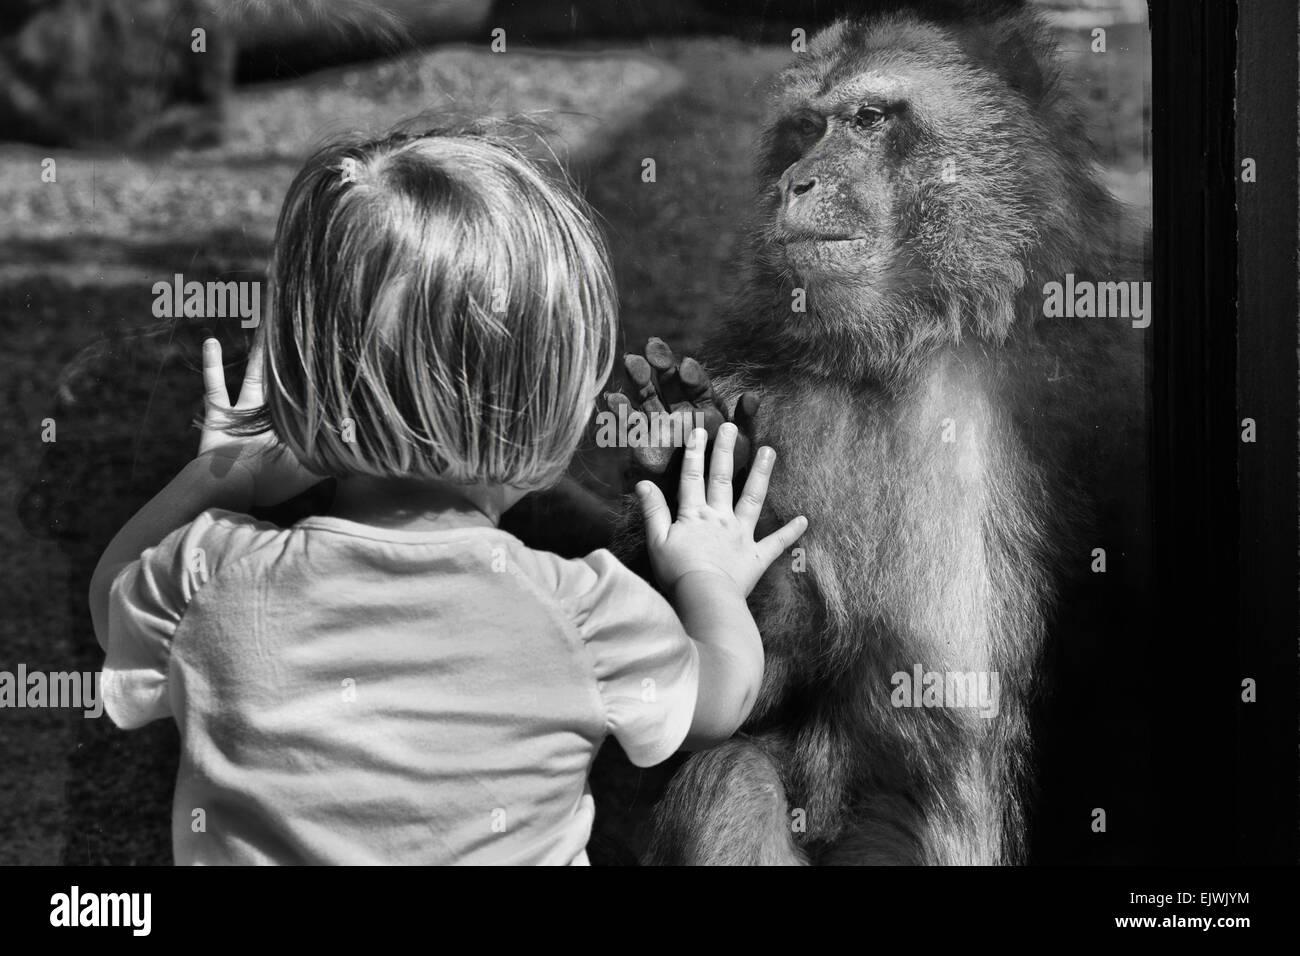 A tail-less macaque touching the zoo glass at same time that a child does Stock Photo